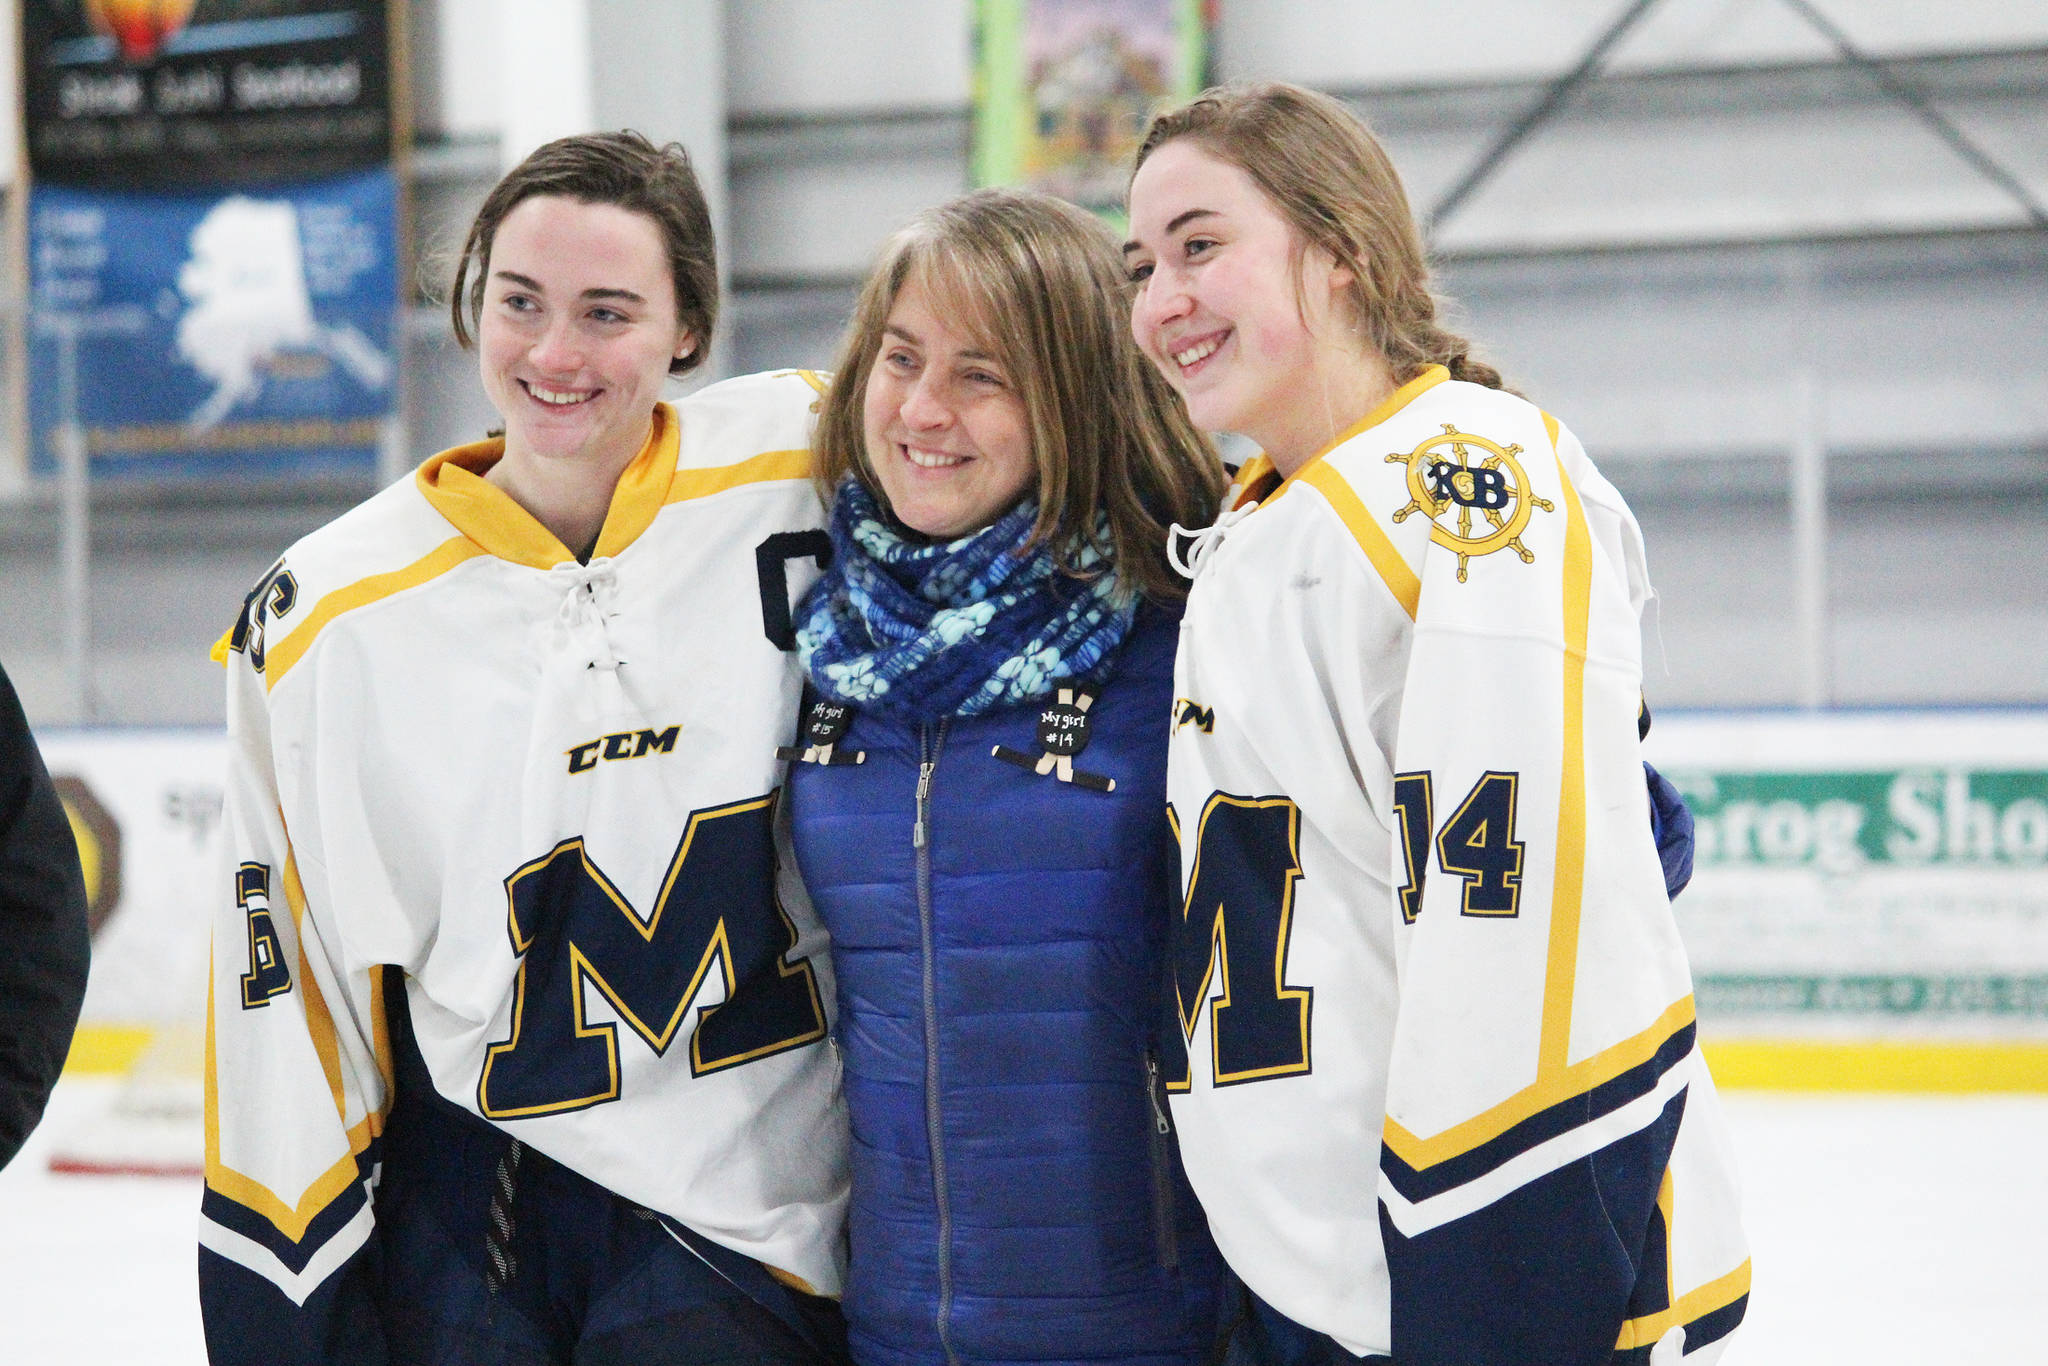 Homer seniors Ali McCarron (left) and Brenna McCarron (Right) are honored with they mom, Julie, on Senior Night for the Homer High School hockey team Thursday, Jan. 24, 2019 at Kevin Bell Arena in Homer, Alaska. The Mariners defeated Houston High School 10-1. (Photo by Megan Pacer/Homer News)